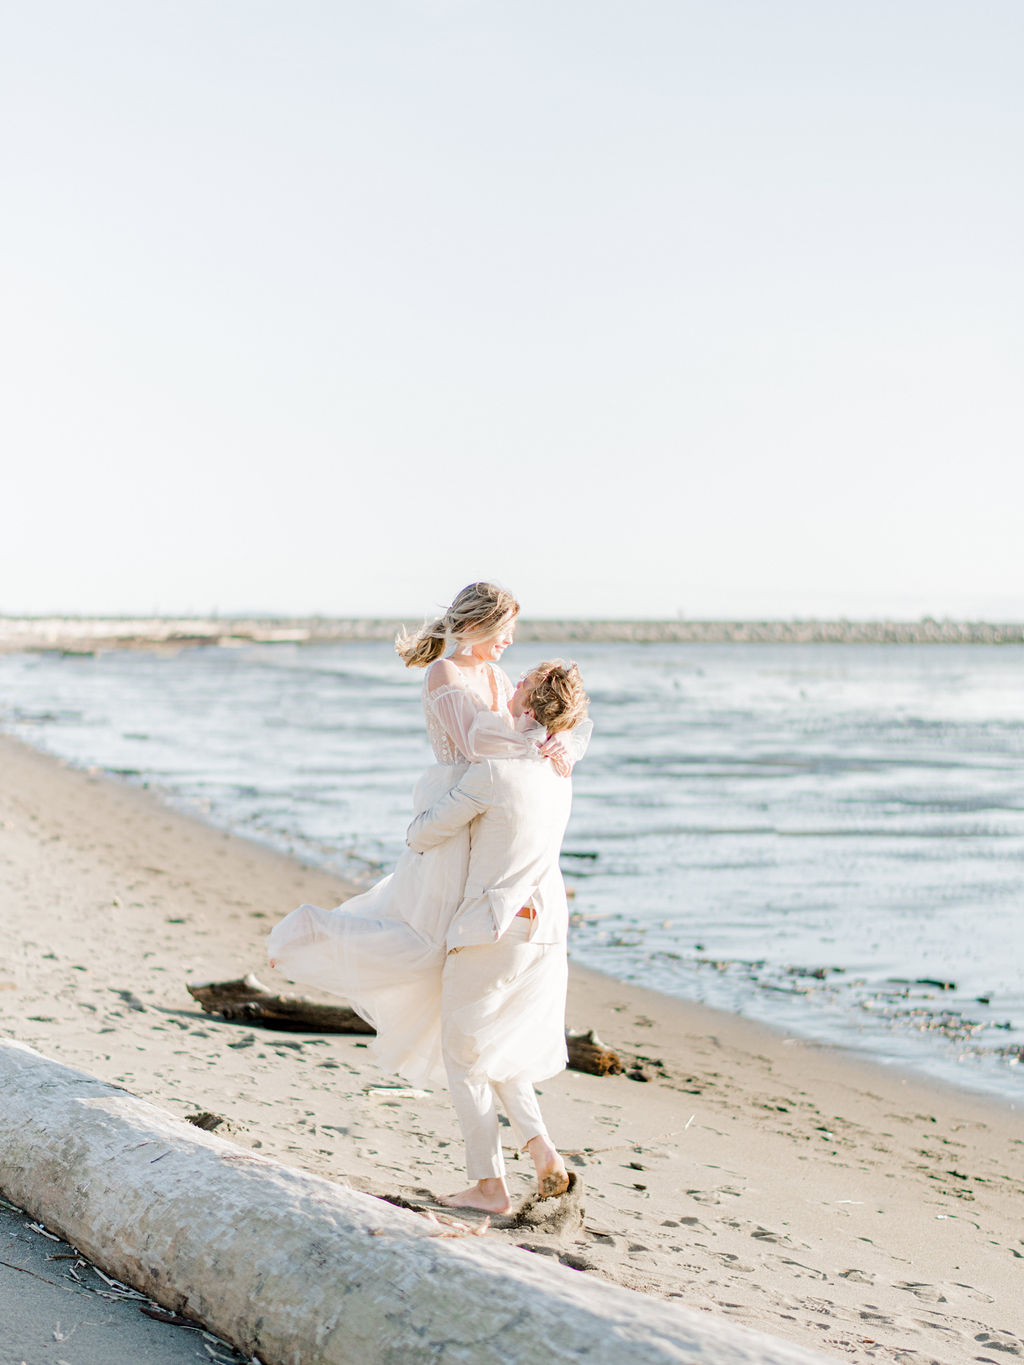 Romantic wedding portraits on the beach in Vancouver, British Columbia; Fine art wedding inspiration for an intimate beach wedding, light and airy wedding portraits